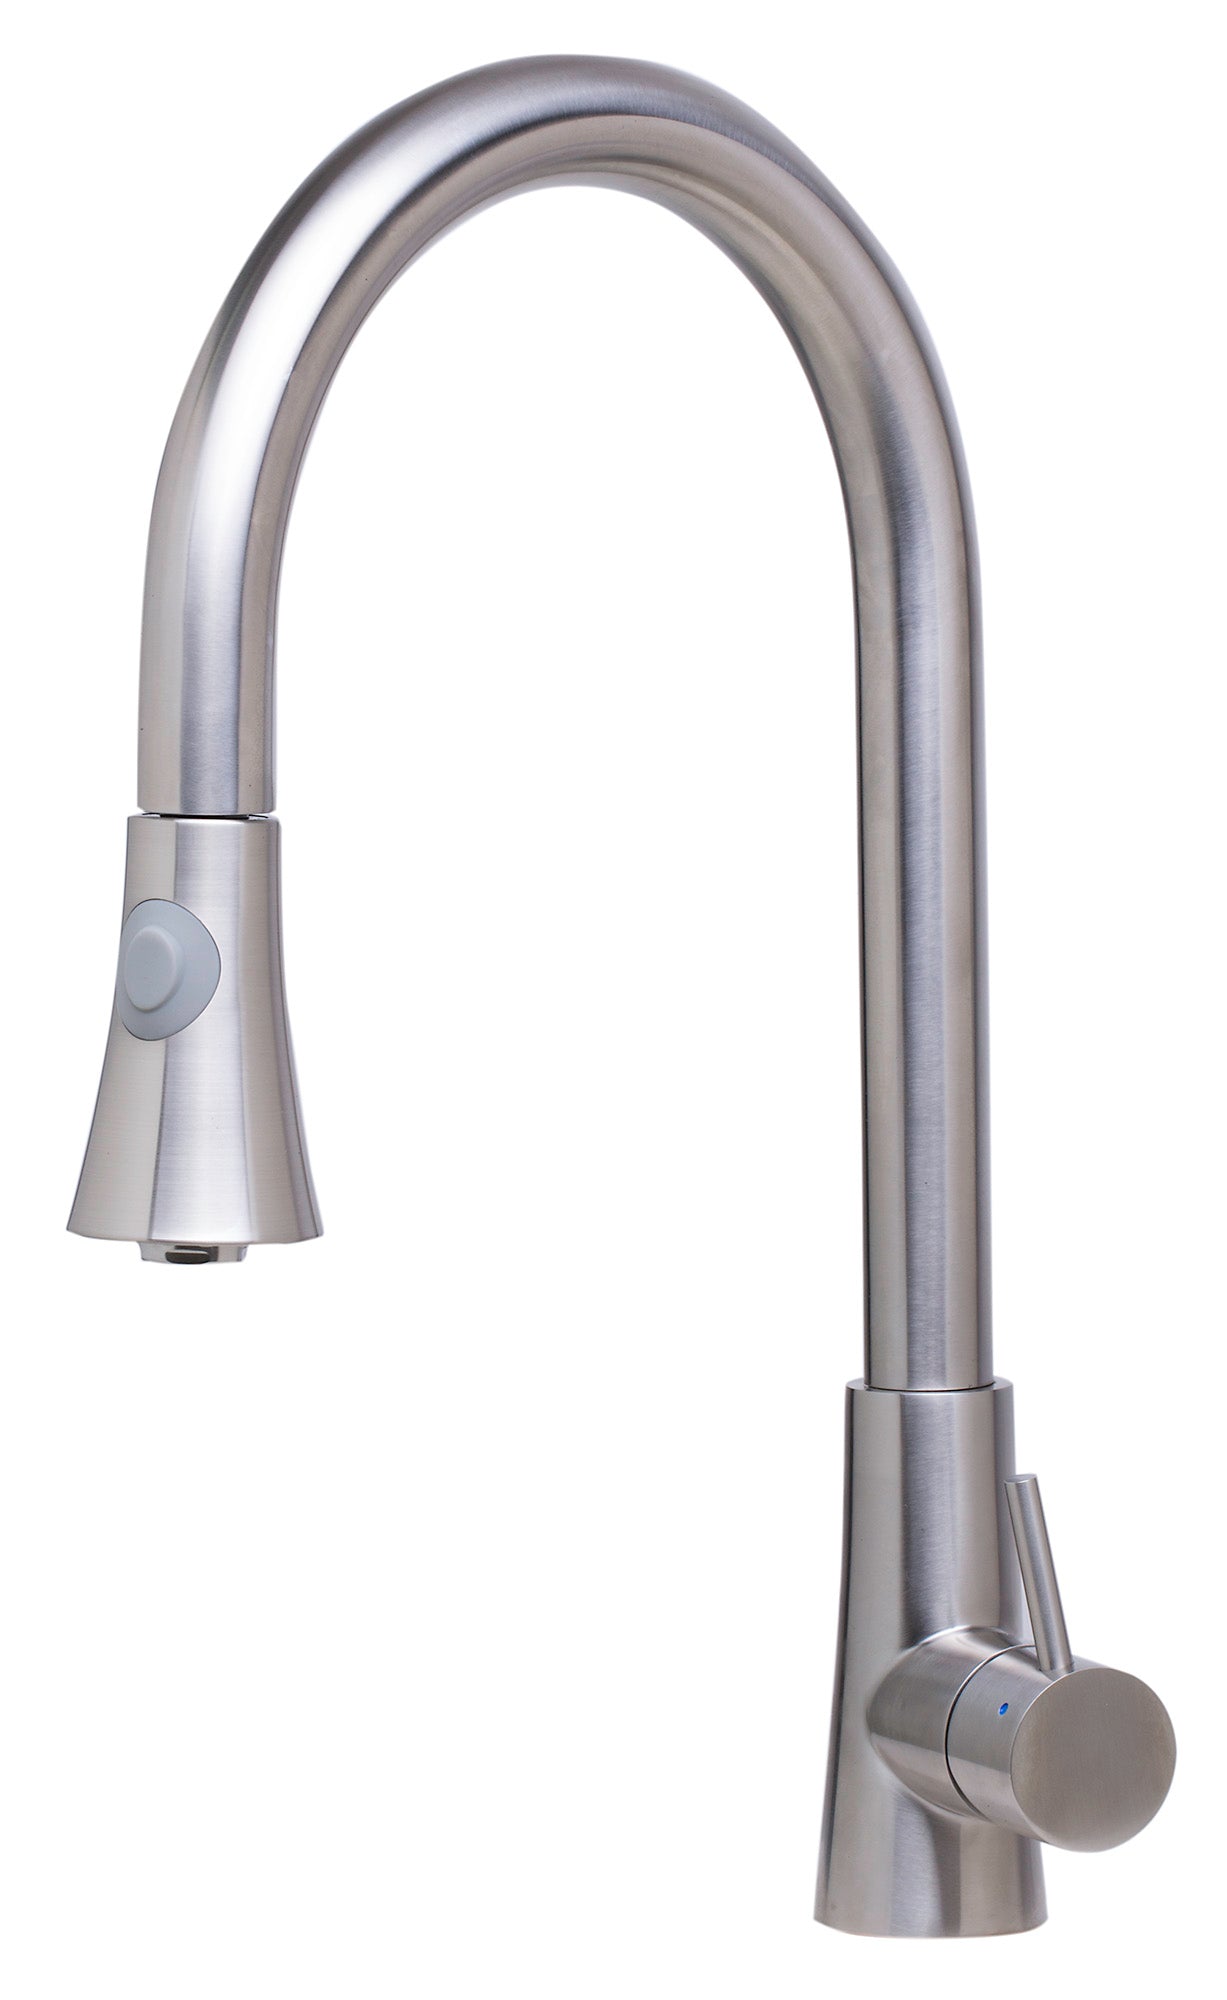 Alfi brand AB2034 Stainless Steel Pull Down Single Hole Kitchen Faucet